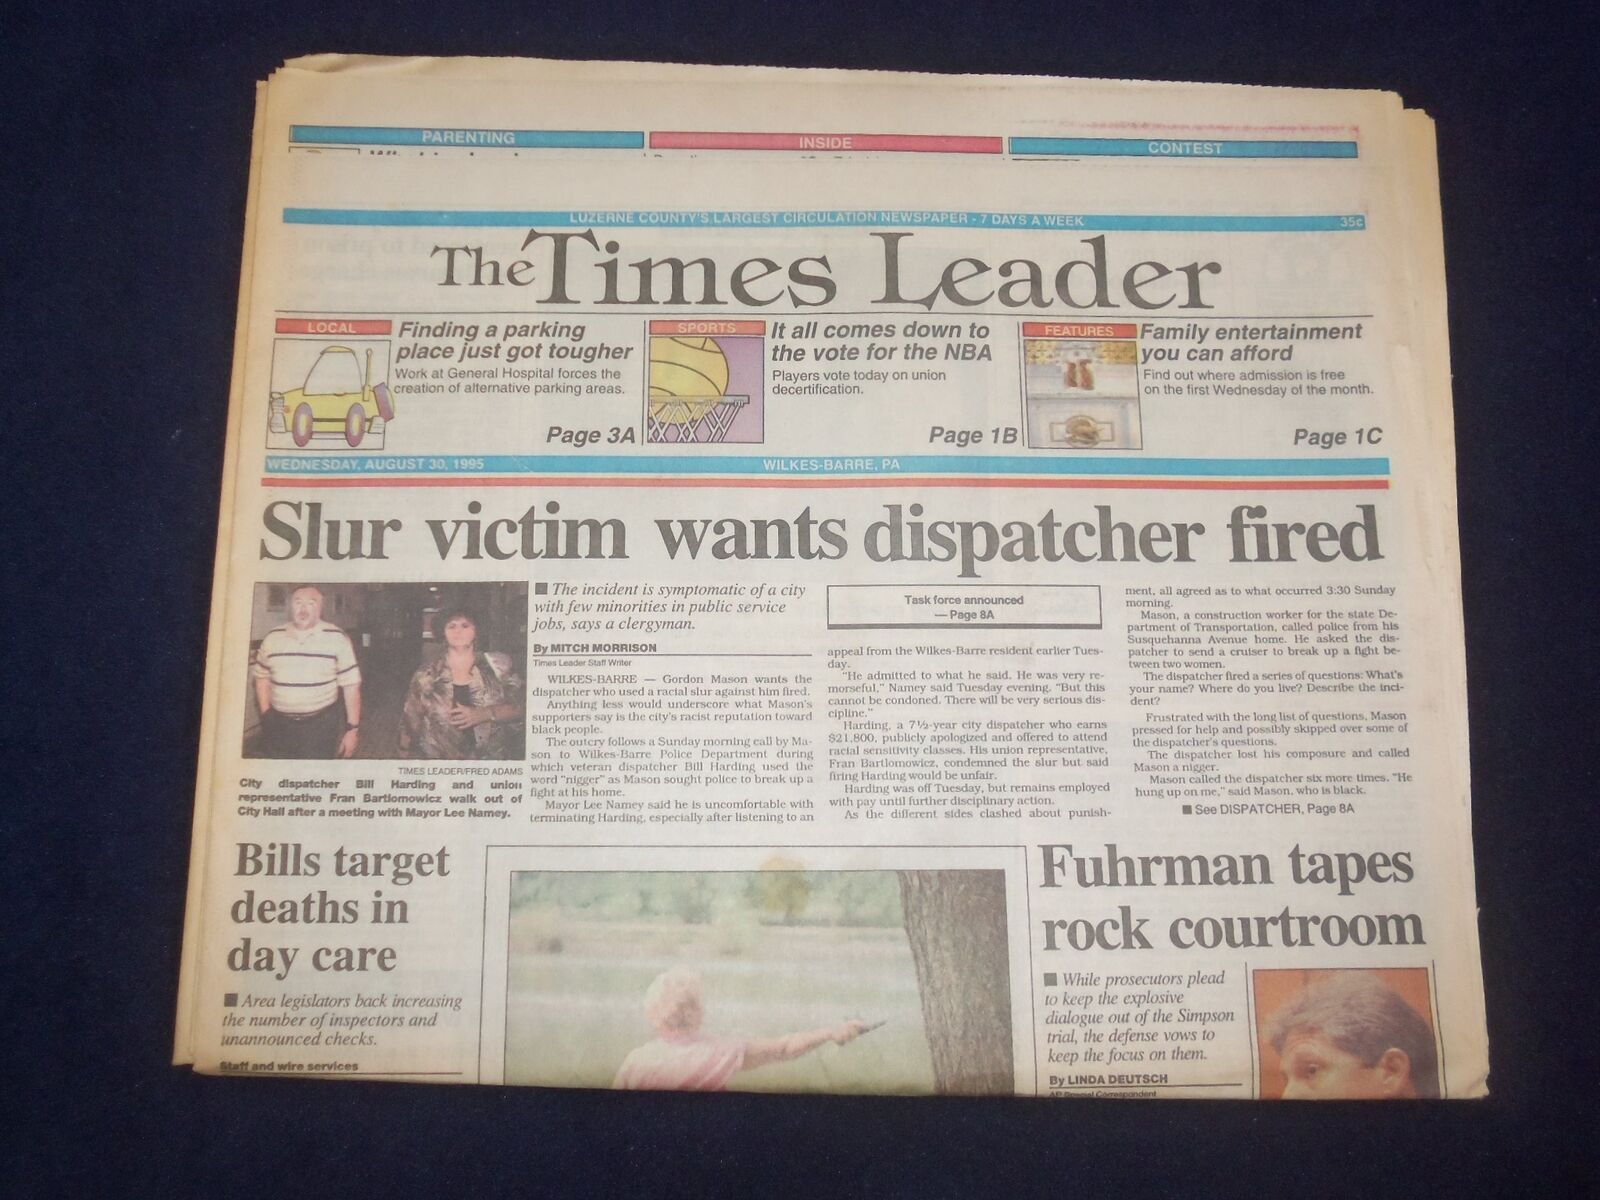 1995 AUG 30 WILKES-BARRE TIMES LEADER -MARK FUHRMAN TAPES ROCK COURT - NP 8130